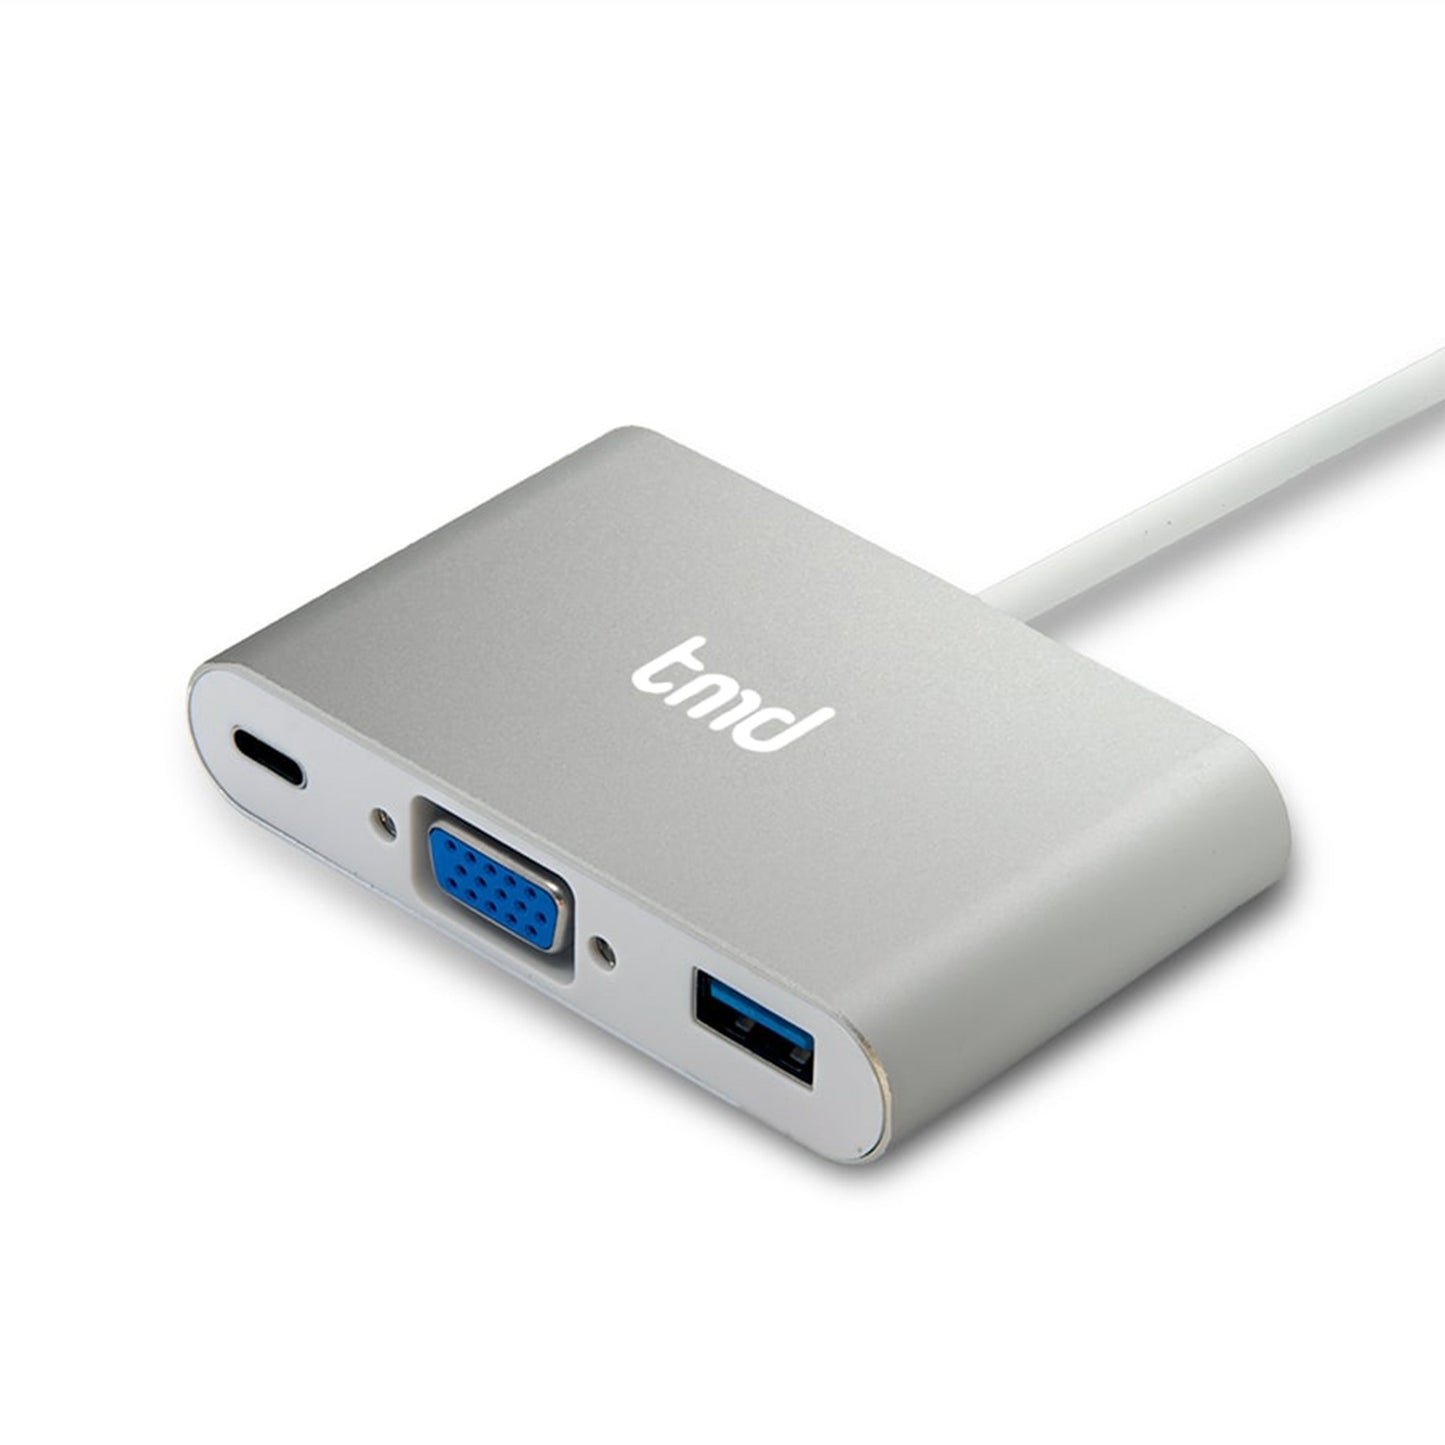 tmd USB-C to VGA Multiport Adapter - Silver - 15-10491